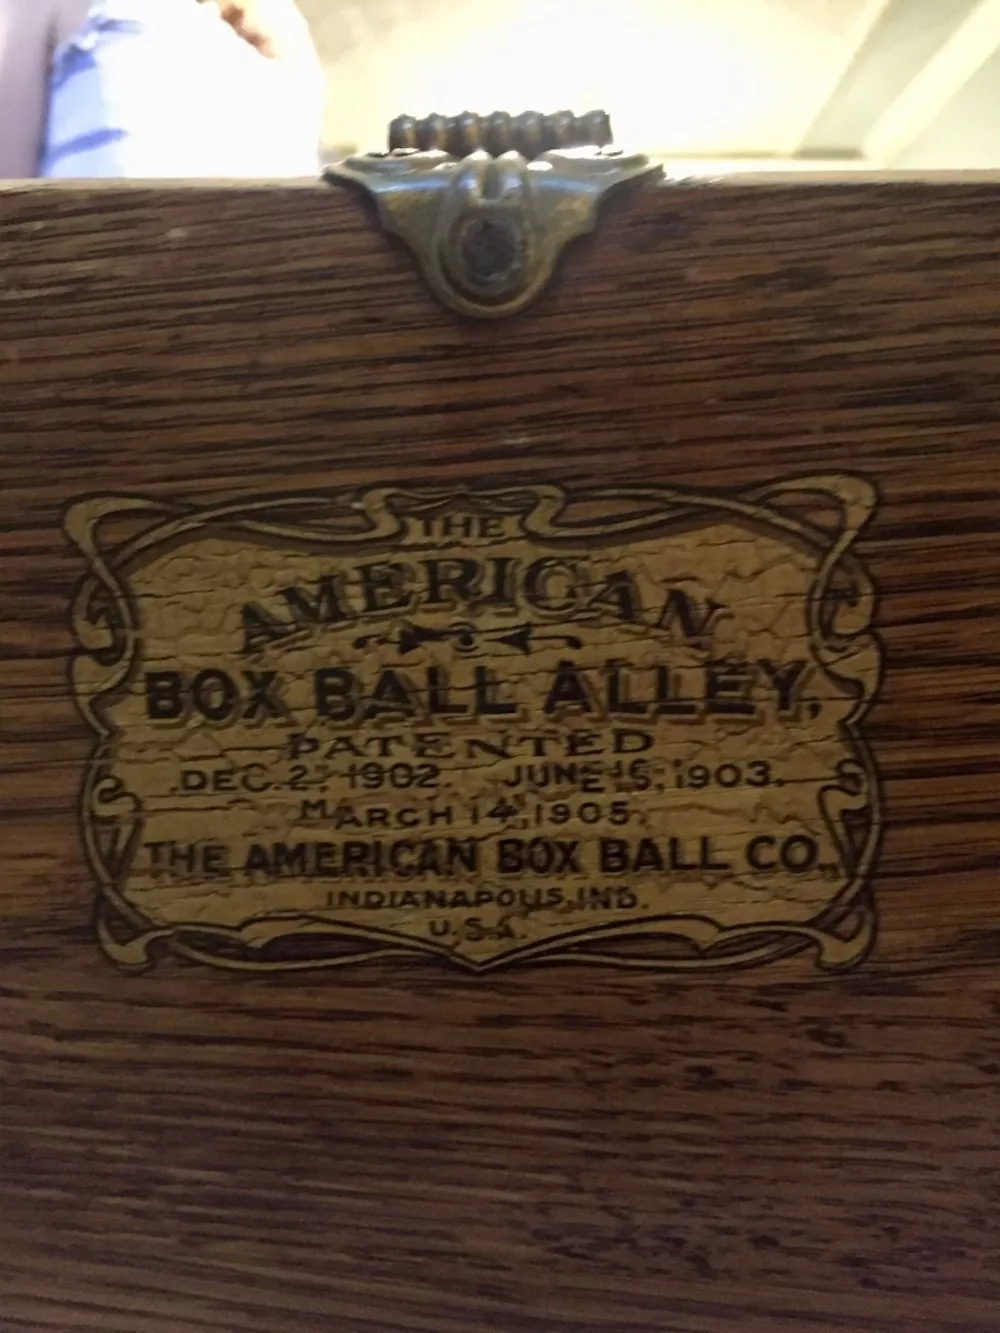 Seal on a wooden box ball bowling alley in the basement of the Seelye Mansion in Abilene, Kansas